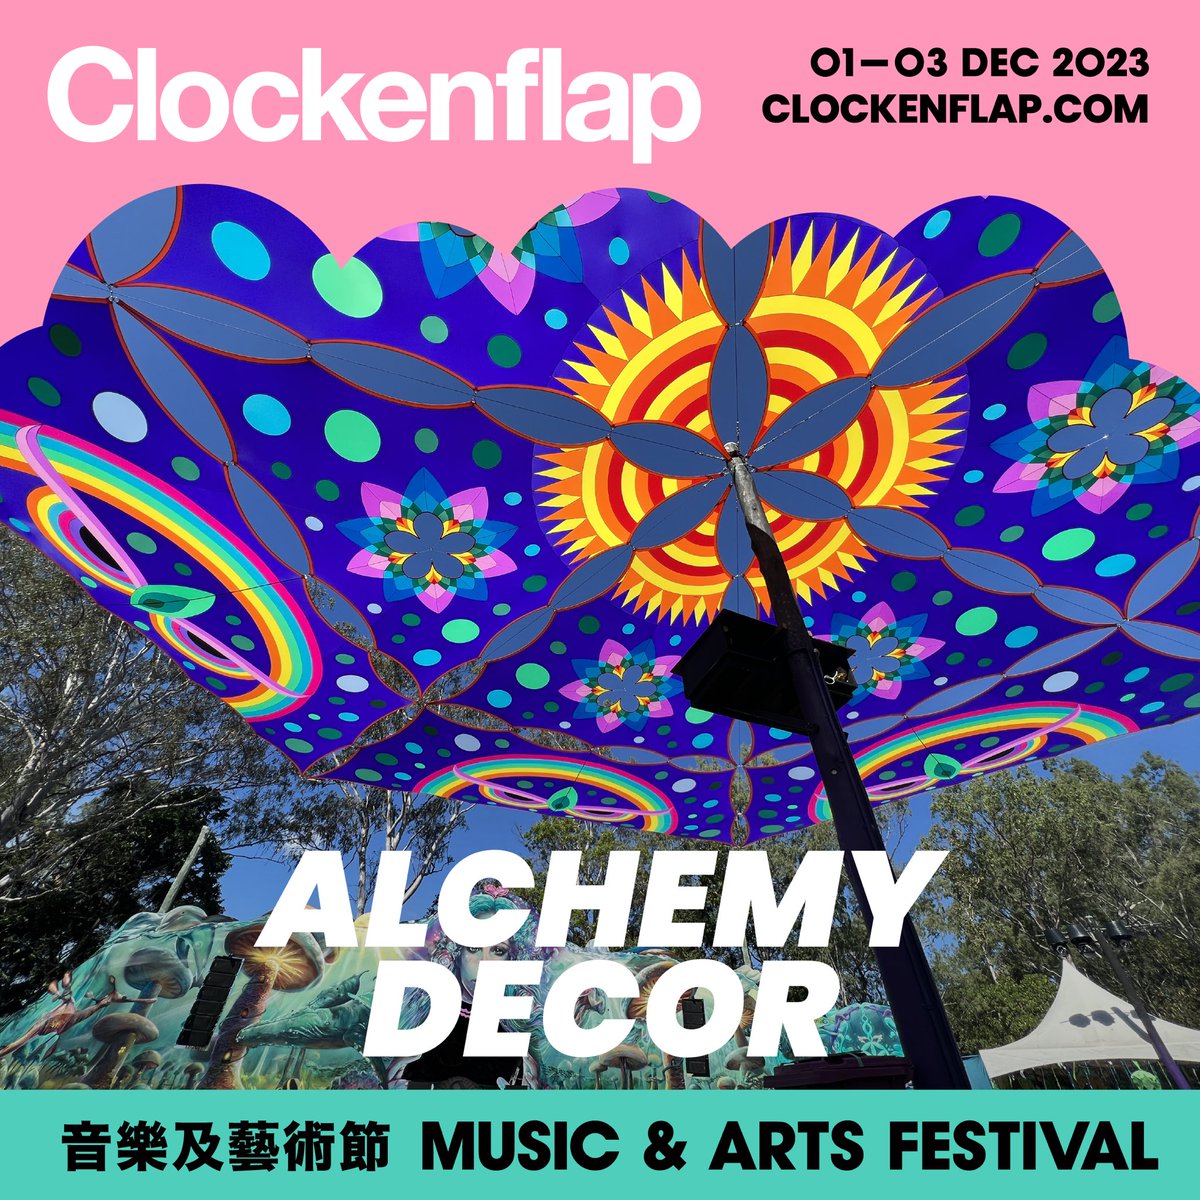 The brainchild of Asher Gunzburg, Perth-based Alchemy Décor is known for its large-scale canopies that provide shade from the sun while showcasing eye-catching pieces of art. Tickets: ticketflap.com/clockenflapdec…